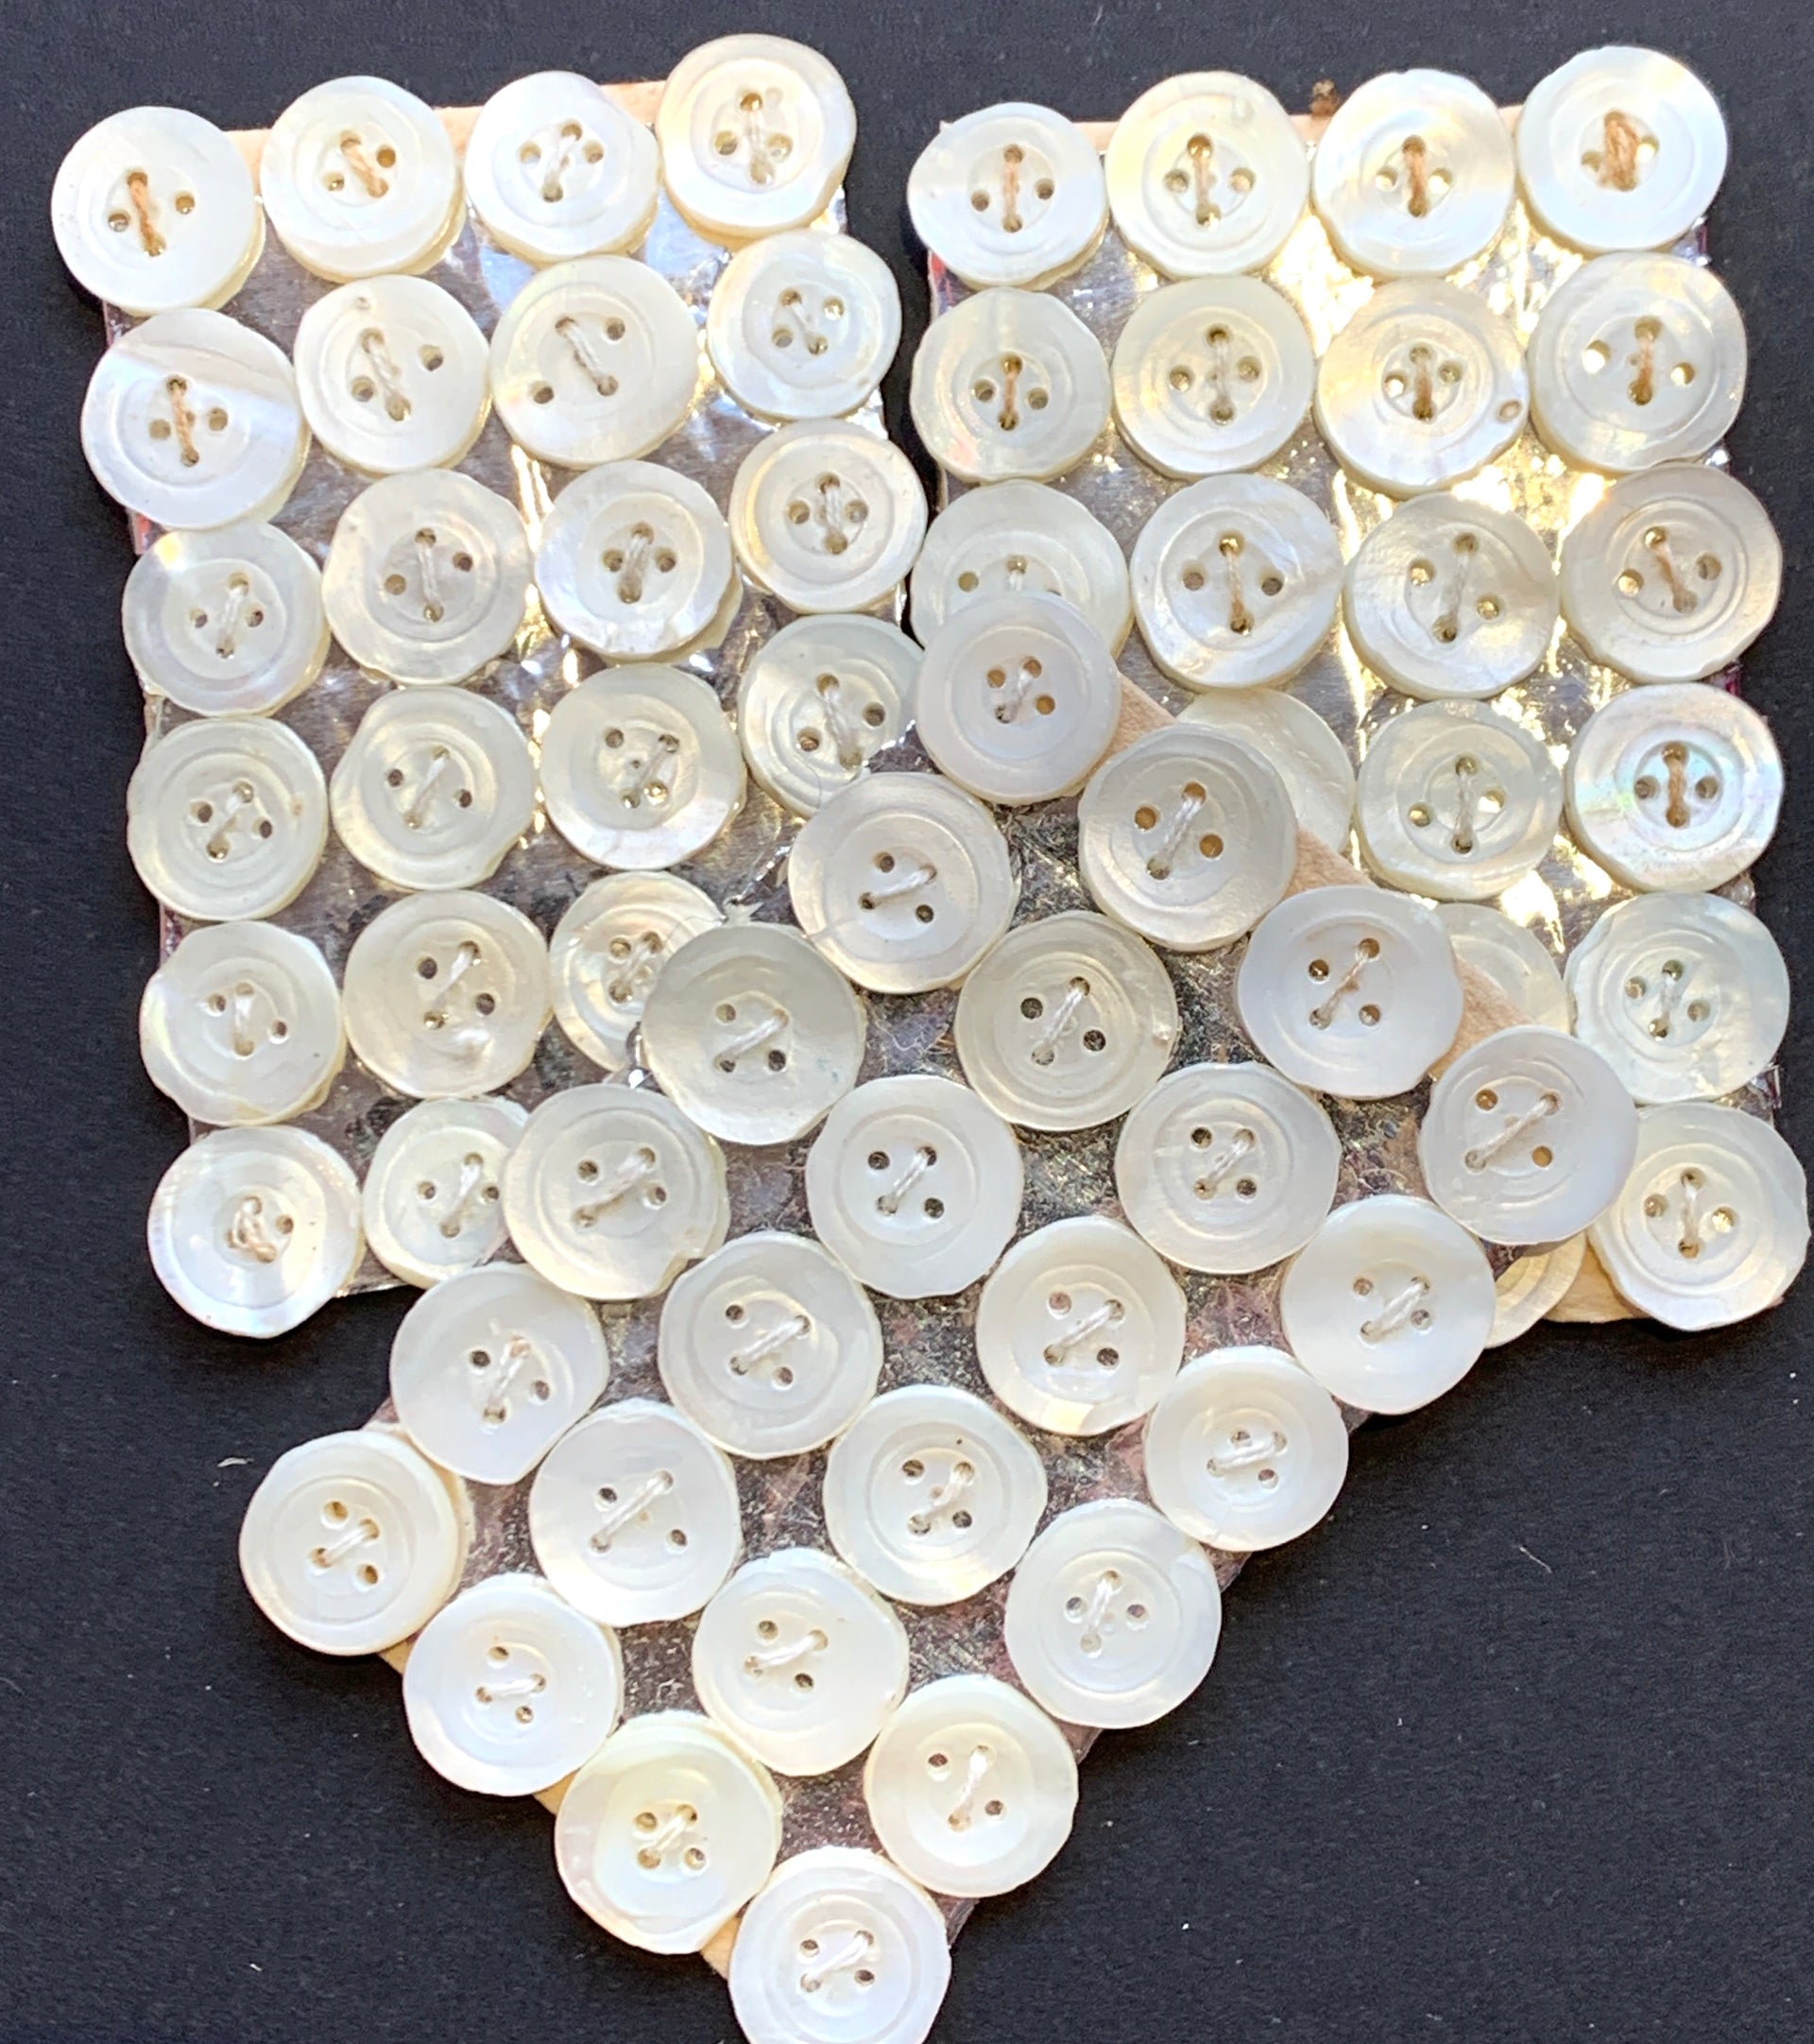 24 Antique/vintage 15mm Mother of Pearl Buttons on Card, Clothes Making,  Slow Stitching, Journalling, Sewing, Textile Art Projects -  Israel